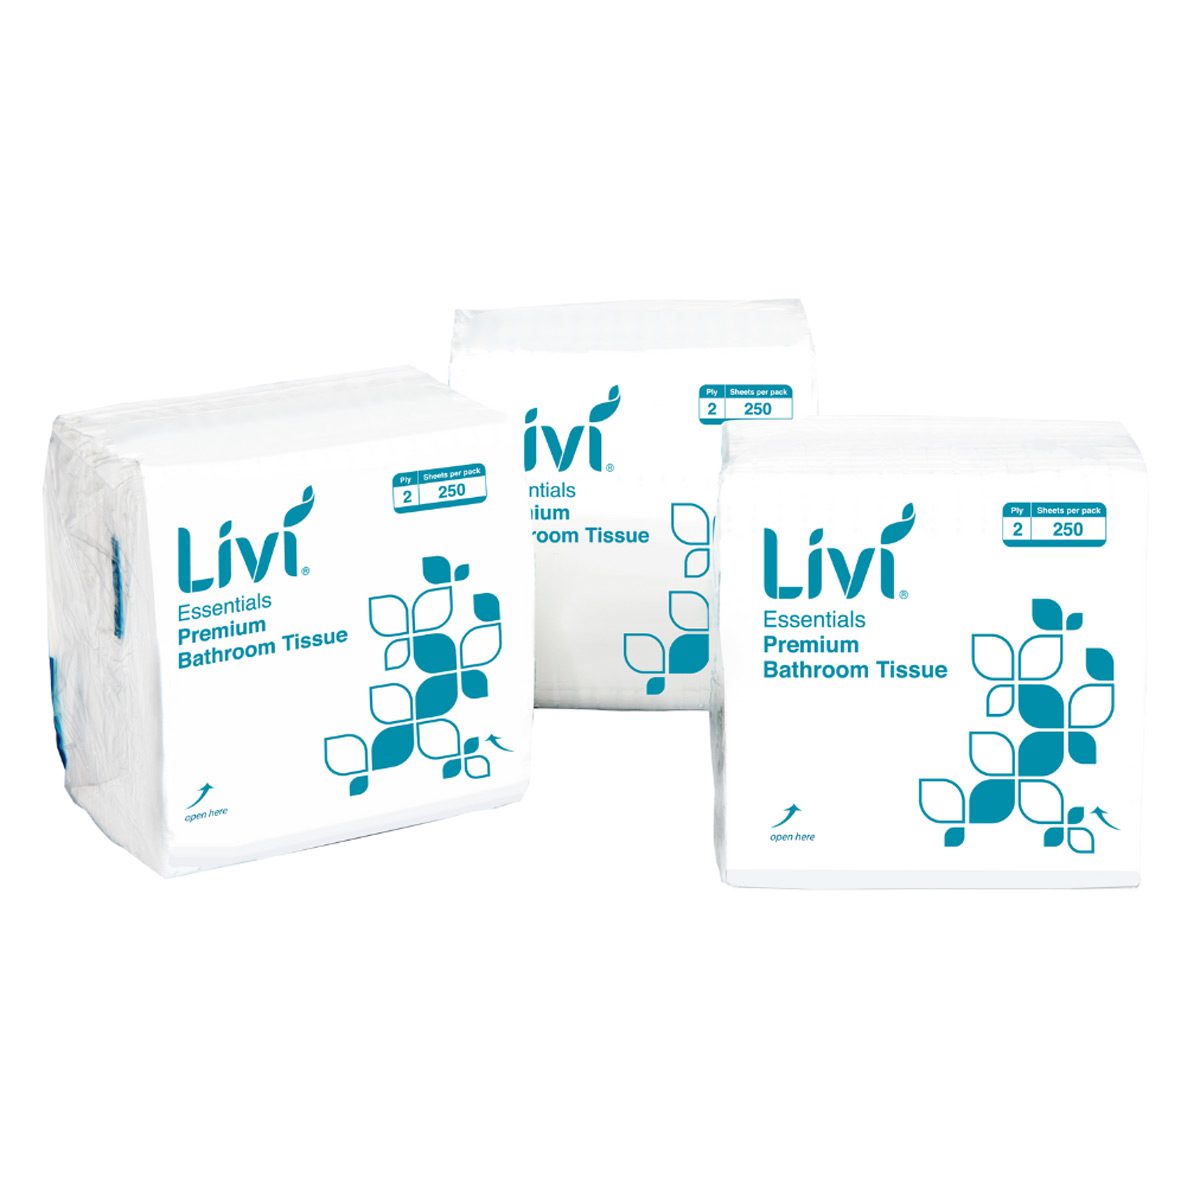 paper-products-toilet-paper-livi-essentials-interleave-bathroom-tissue-2-ply-250-sheets-36-packs-great-as-toilet-tissue-use-as-facial-tissue-early-childcare-centres-vjs-distributors-1006